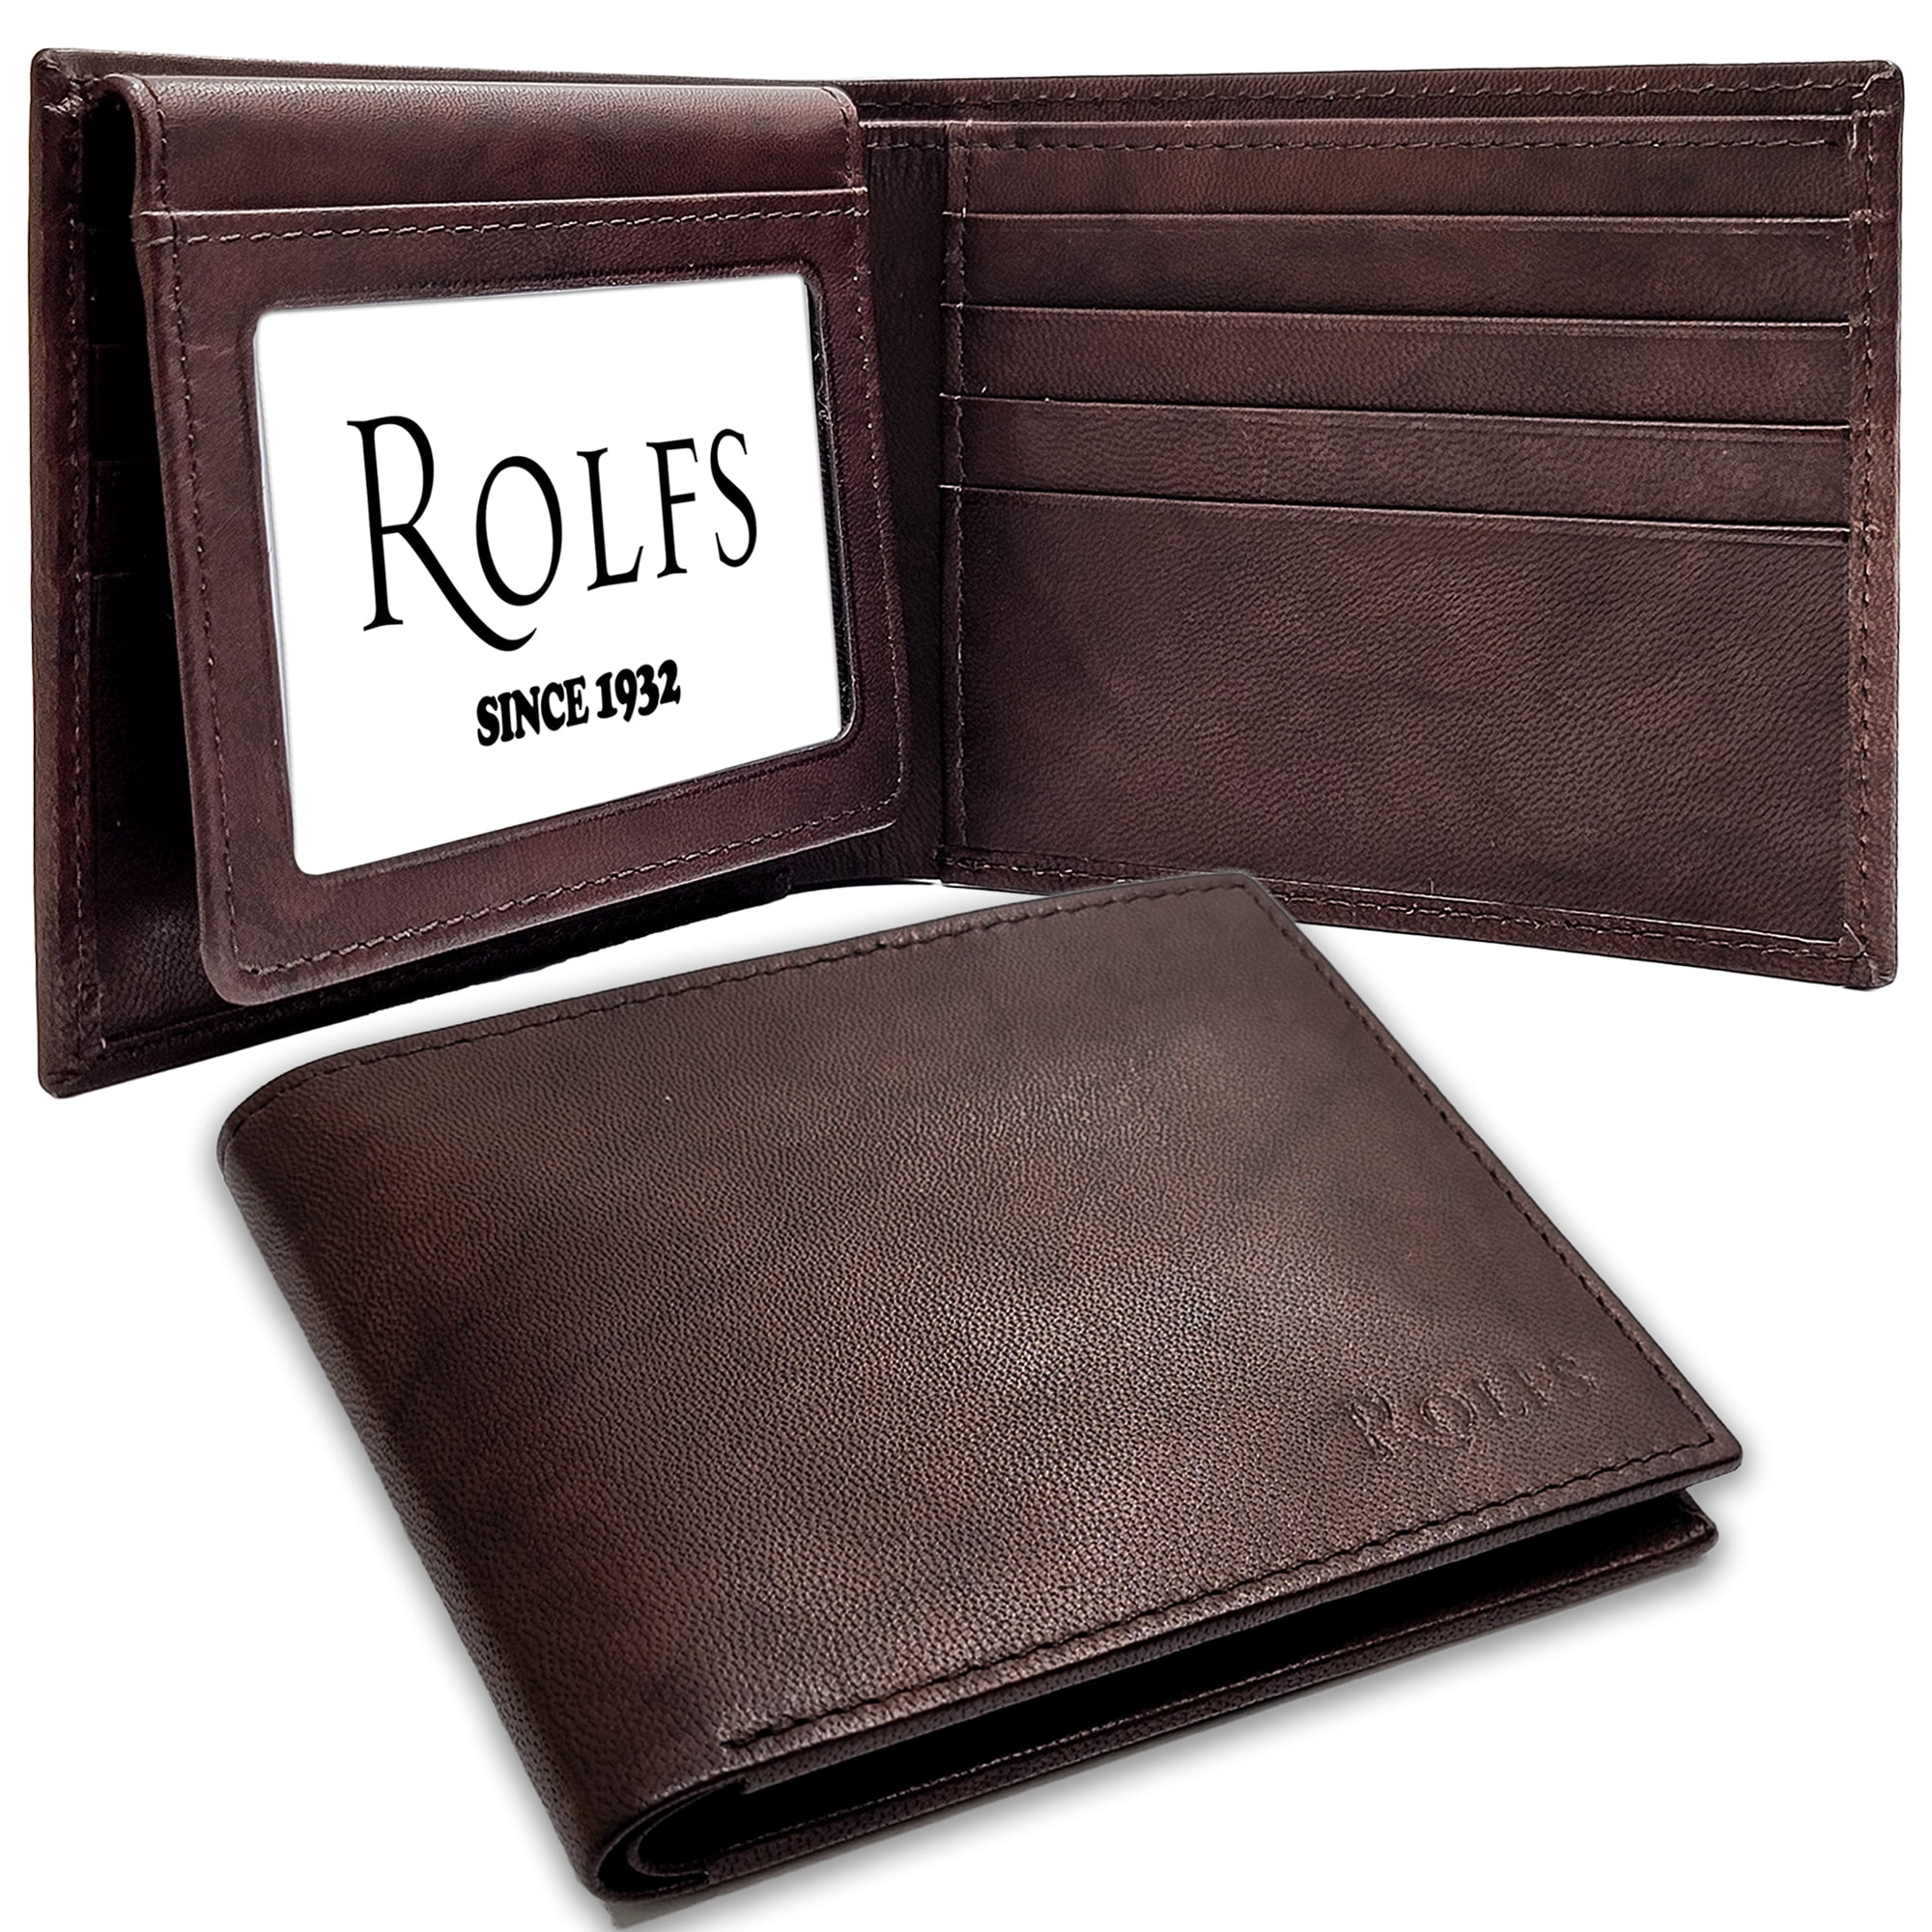 Genuine Leather Trifold Wallets For Men - Mens Trifold Wallet With 